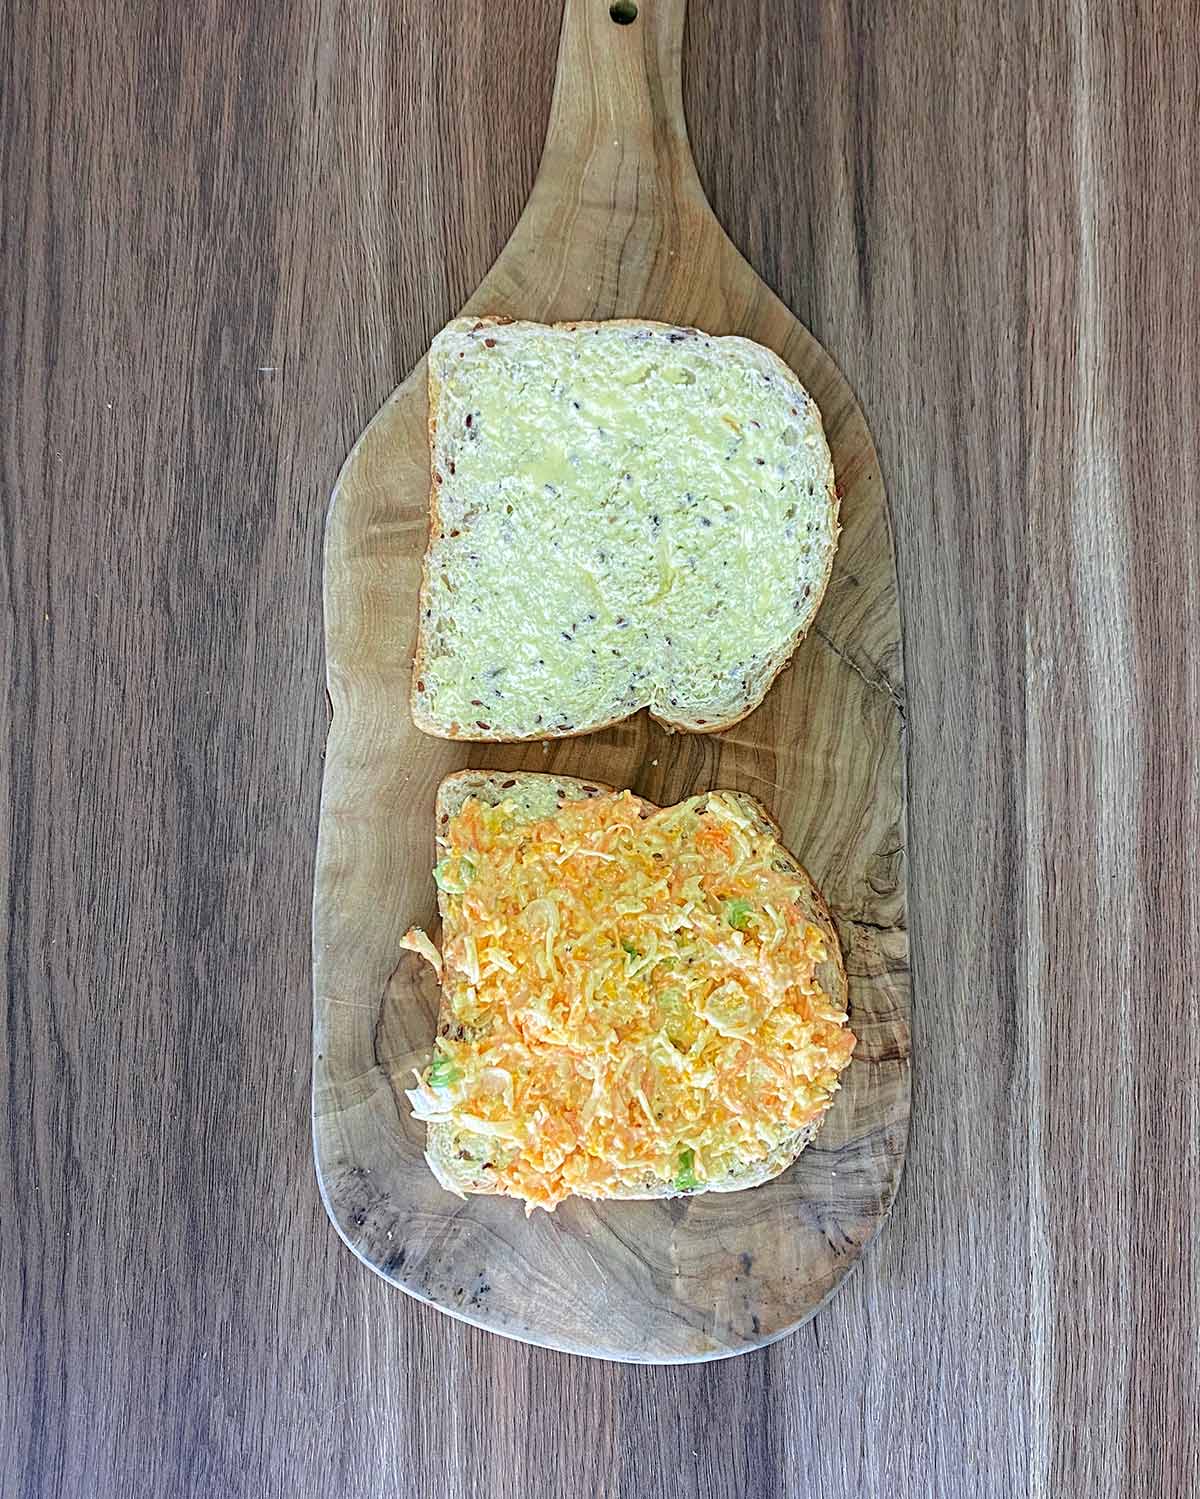 Two slices of buttered bread, one with cheese savoury mixture spread over it.